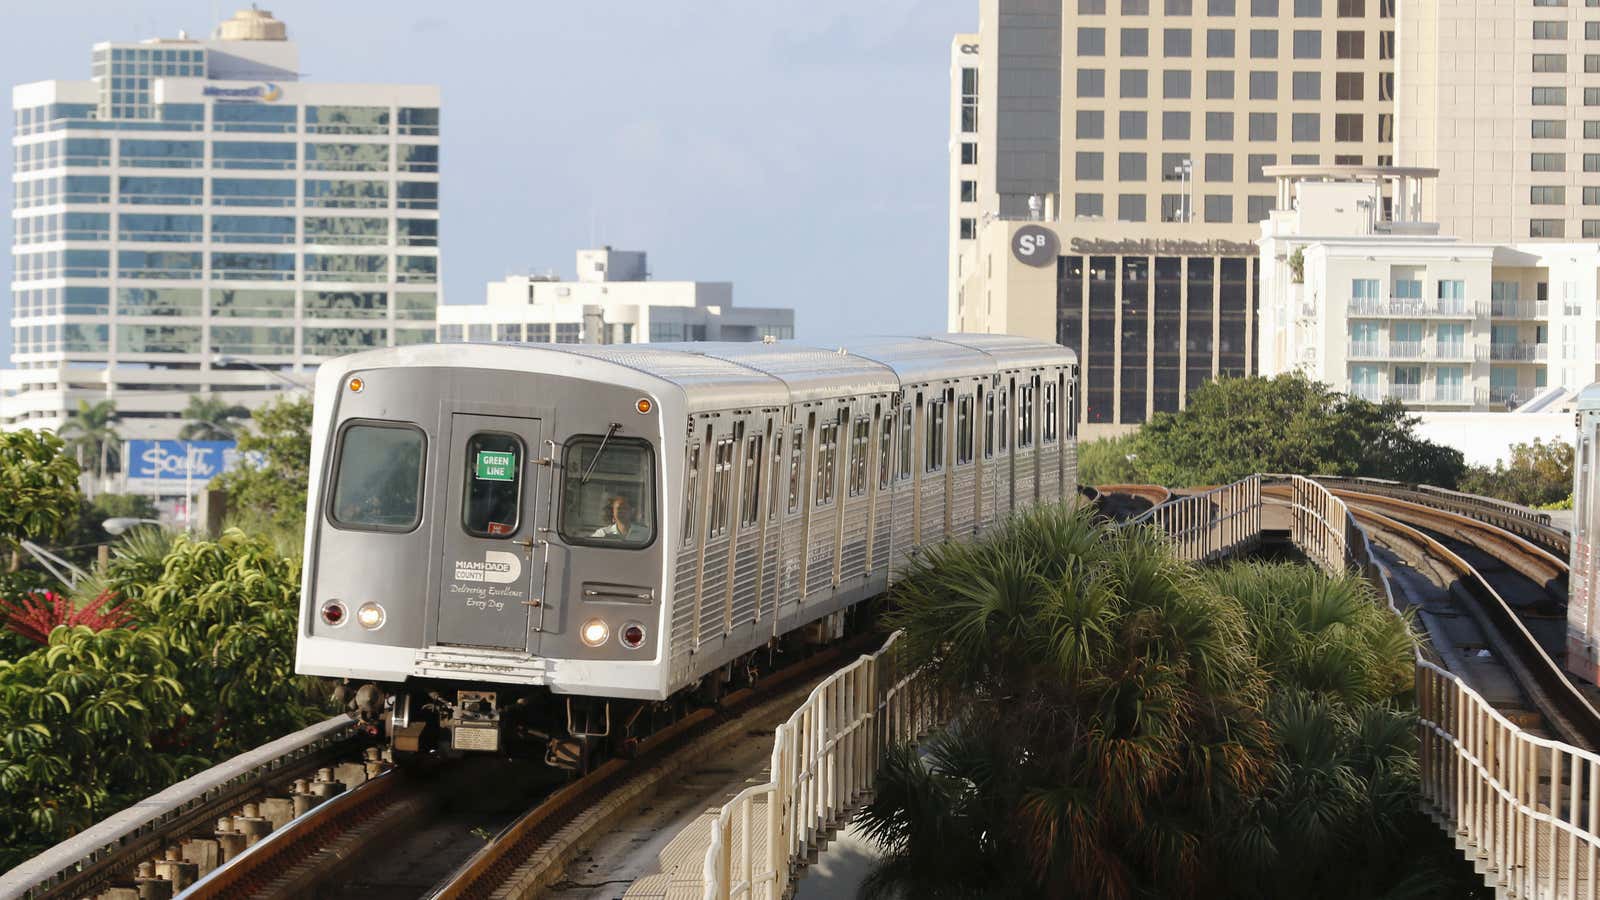 Miami’s Metrorail train rumbles between buildings and over treetops.